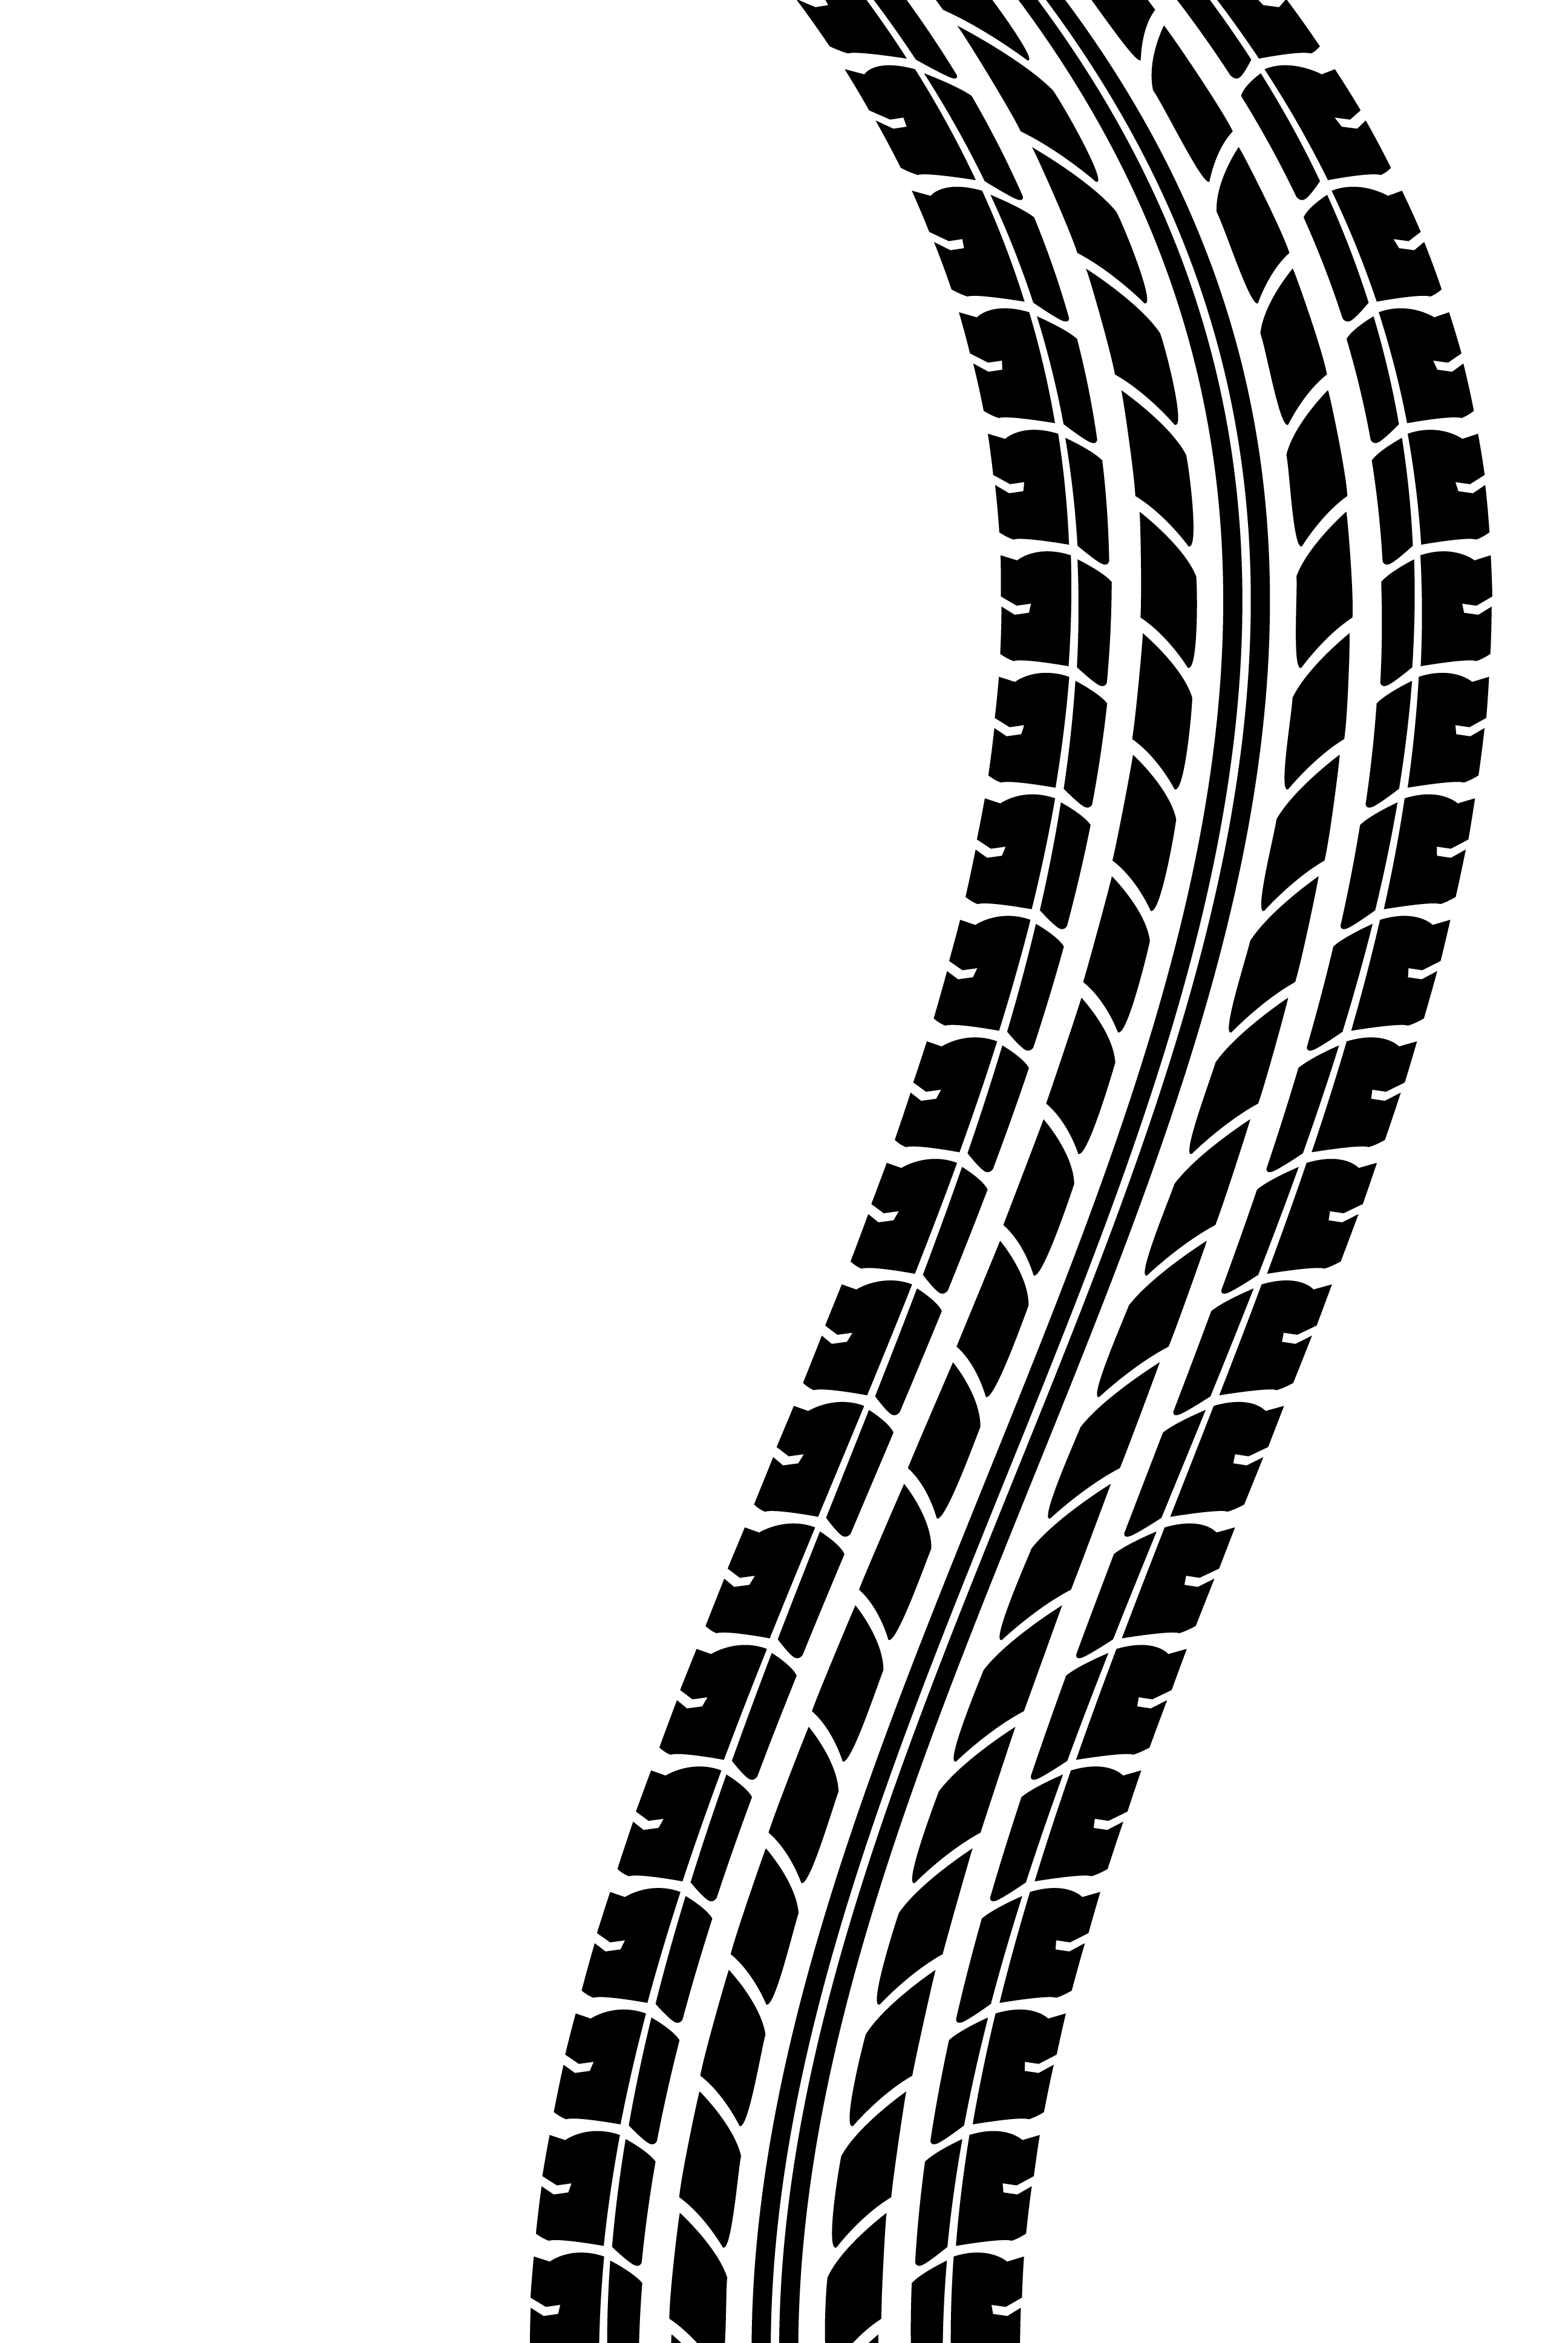 Free Tire Marks Vector - ClipArt Best